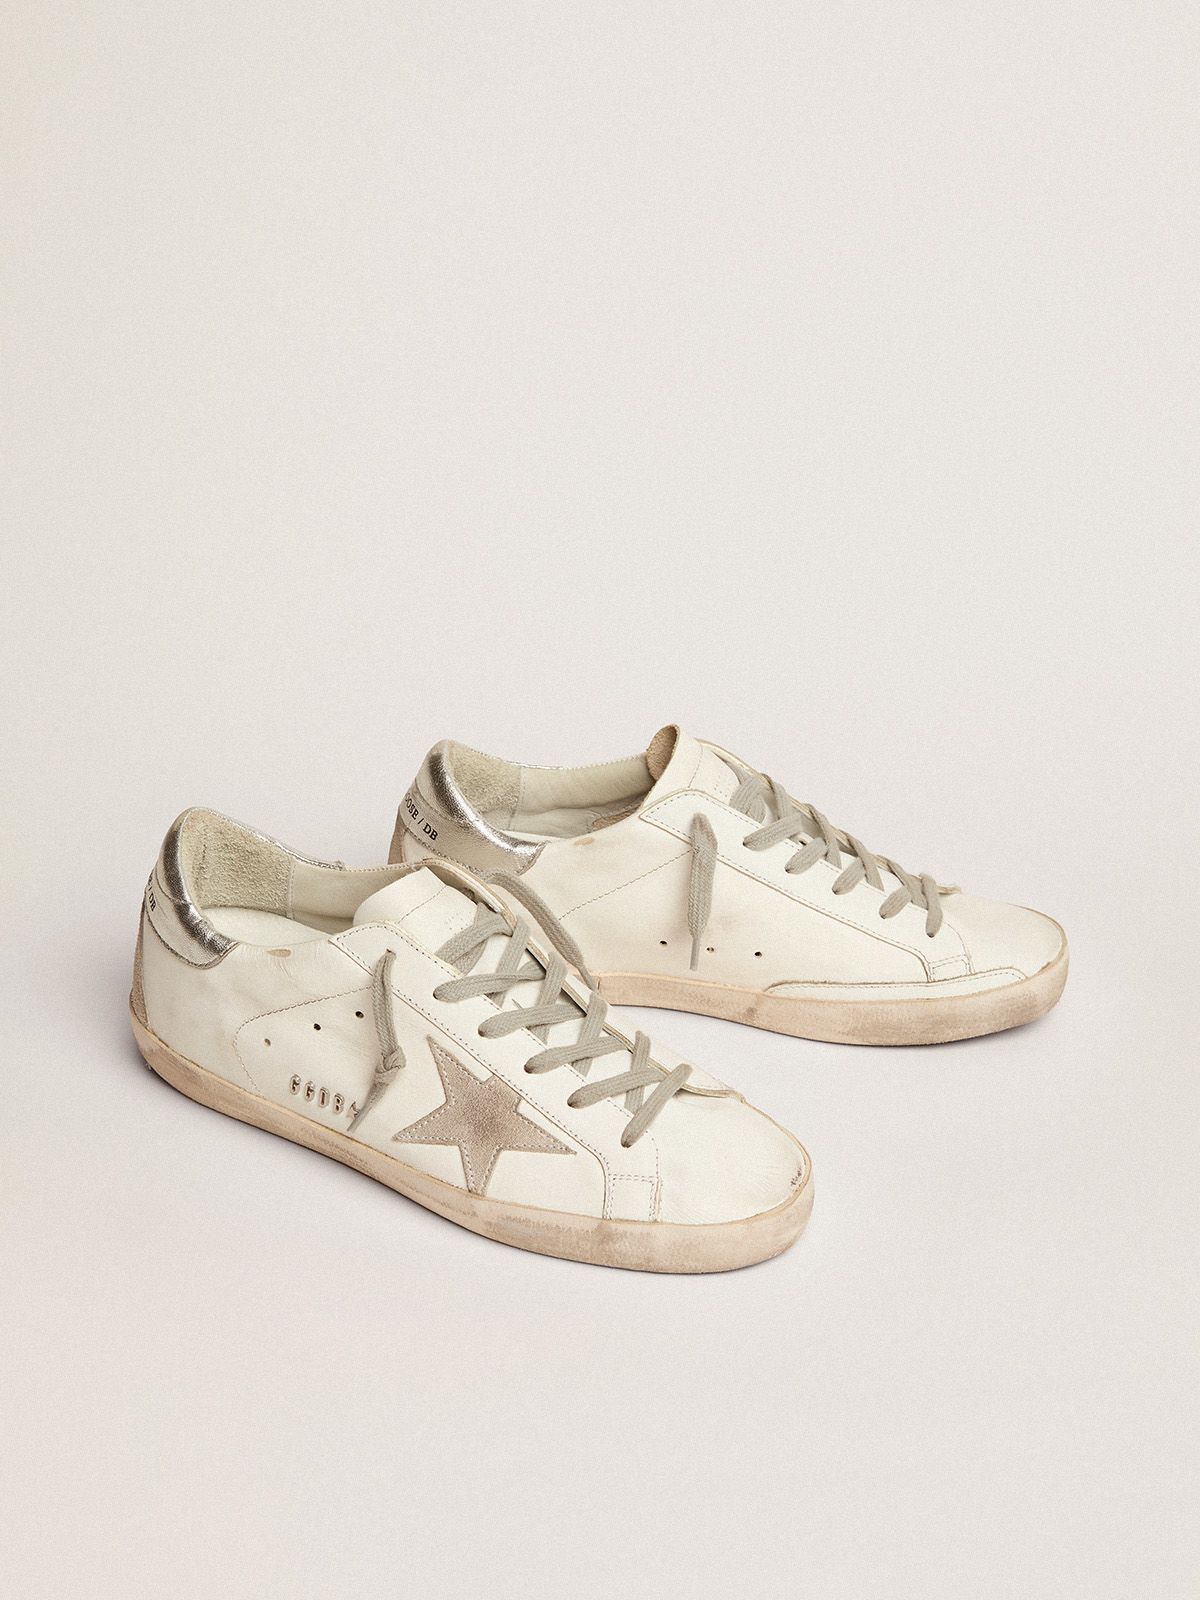 GG Super-Star sneakers with silver-coloured heel tab and metal stud lettering